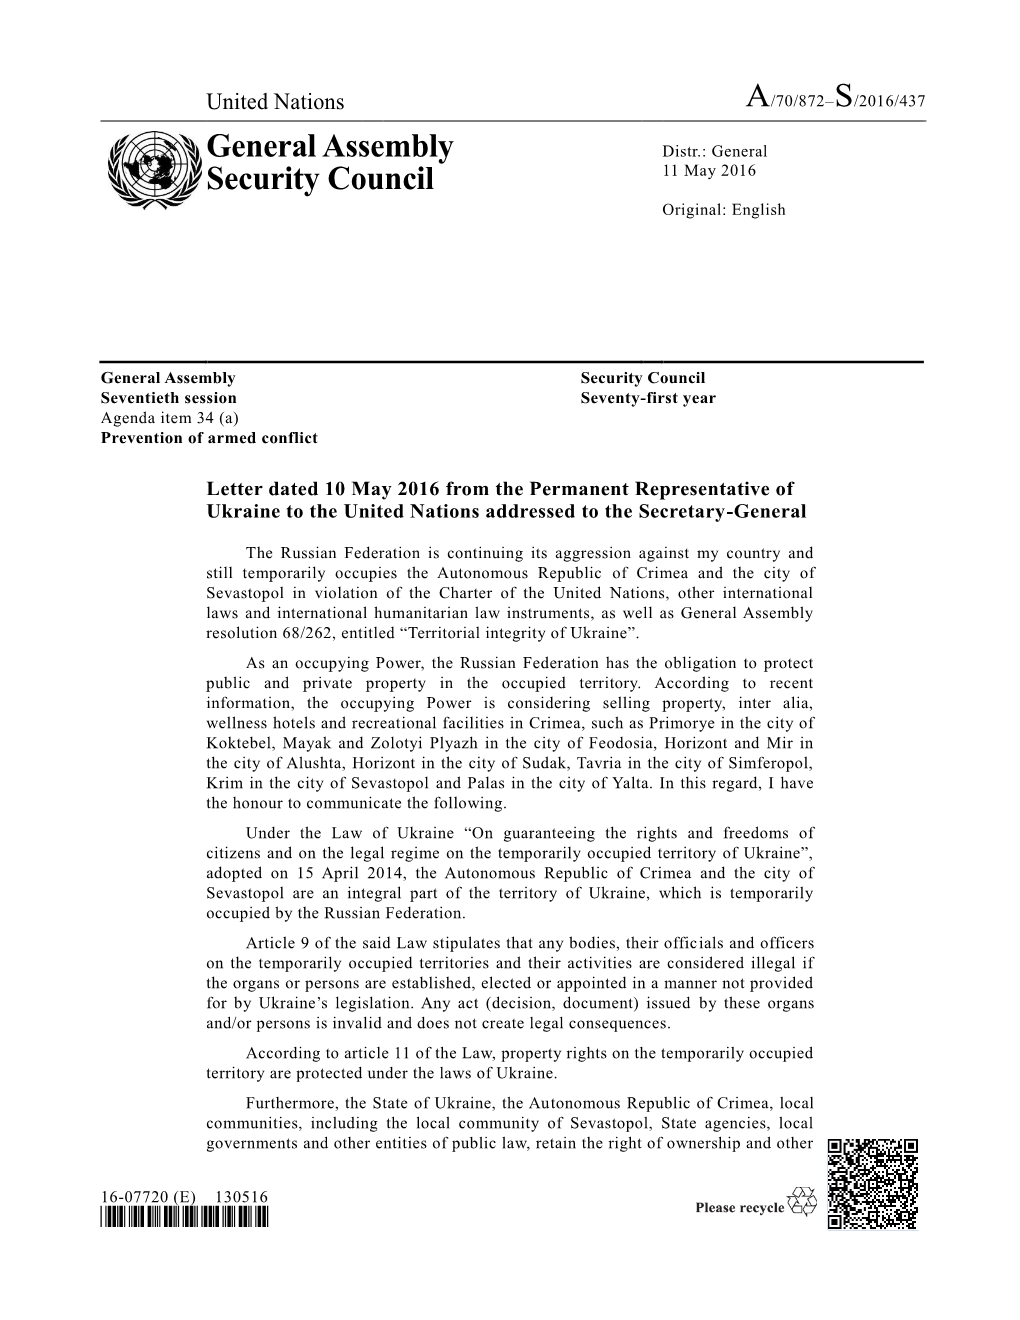 General Assembly Security Council Seventieth Session Seventy-First Year Agenda Item 34 (A) Prevention of Armed Conflict